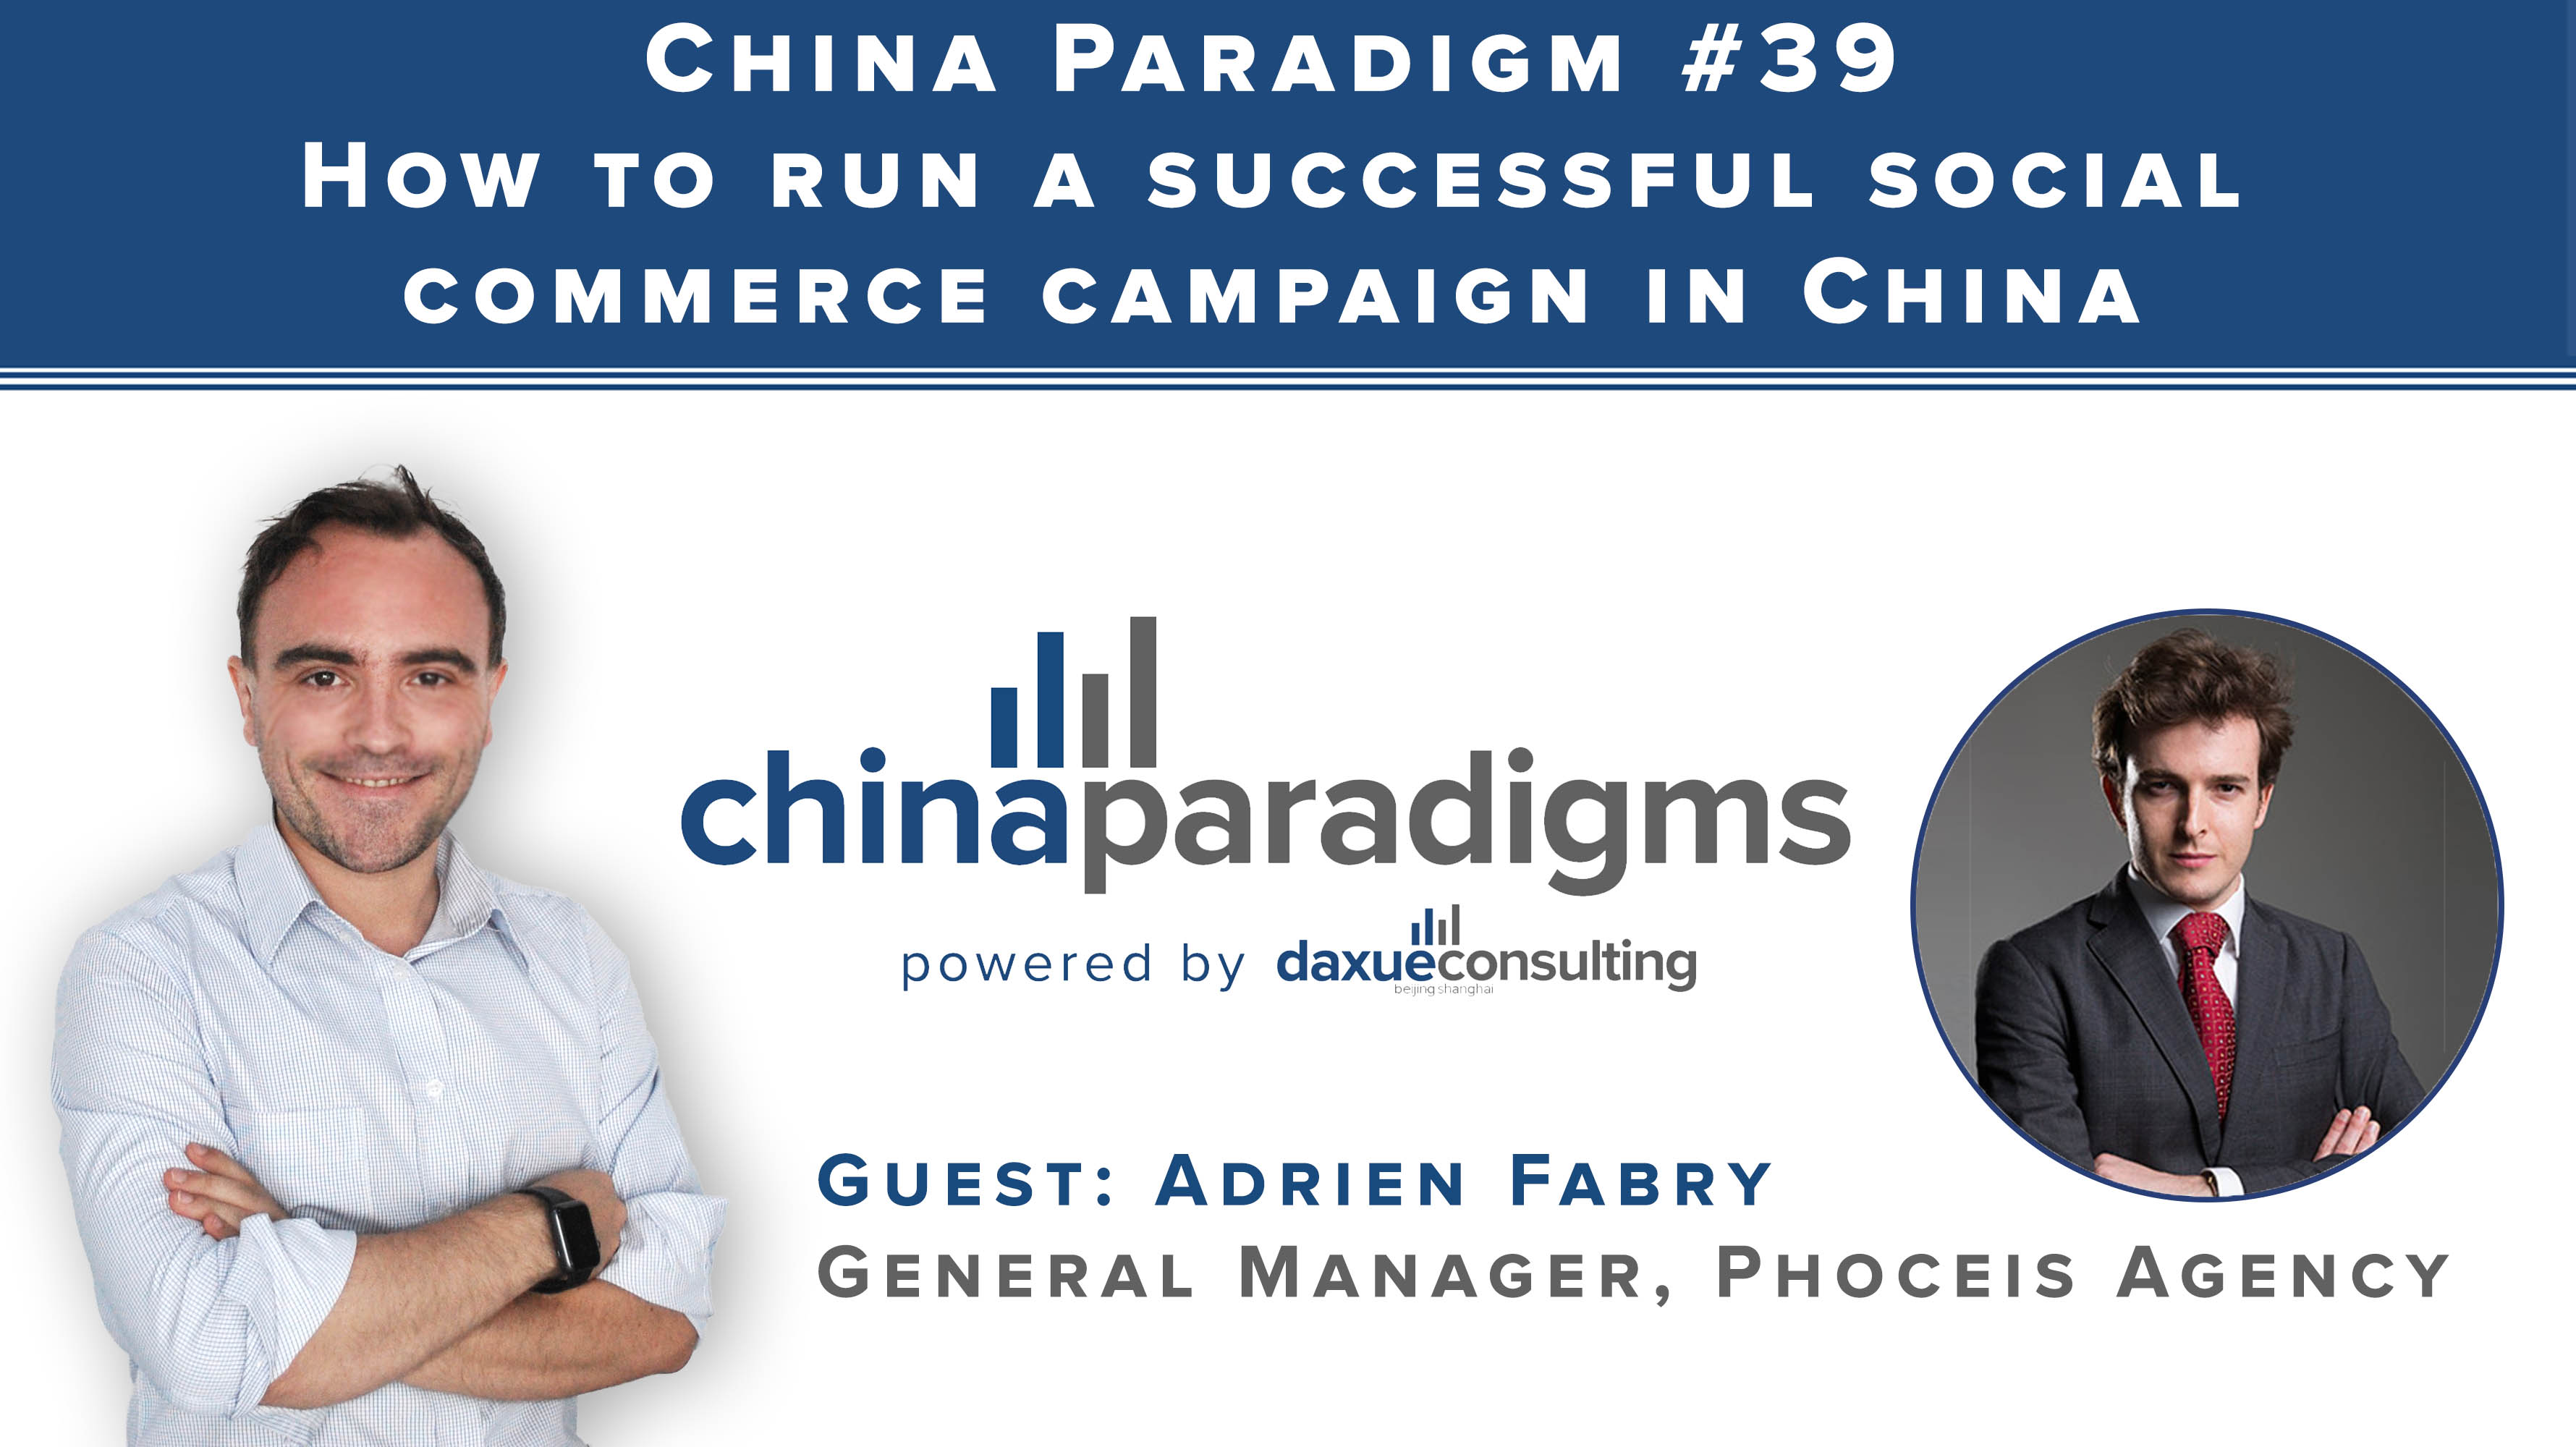 [Podcast] China Paradigm 39: How to run a successful social commerce campaign in China